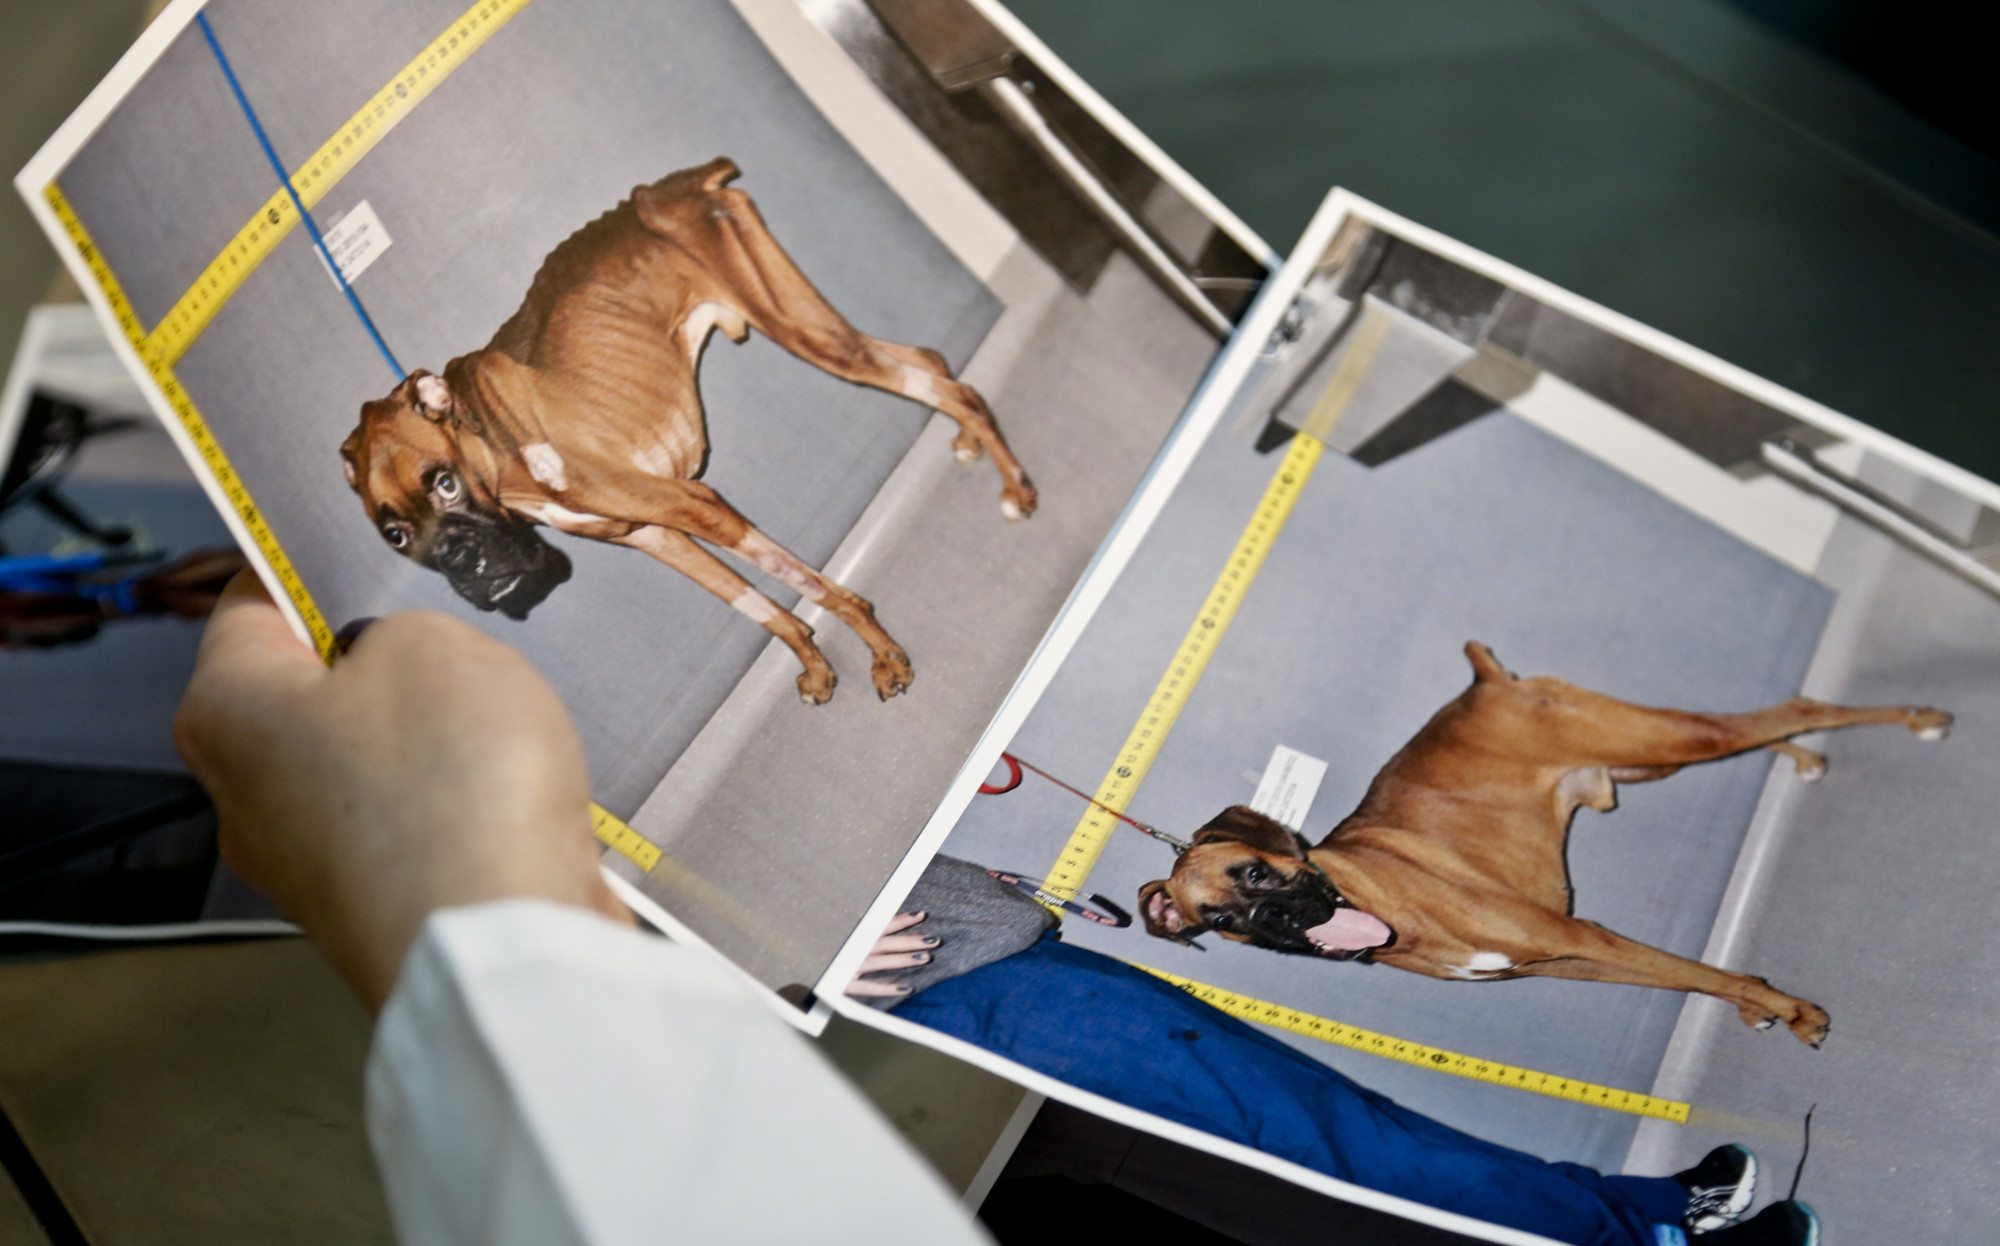 Before and after photos are shown Thursday April 7, 2016 of a boxer named Brewster cared for at the American Society for the Prevention of Cruelty to Animals (ASPCA ) forensic unit, after he was dropped off last year by a good Samaritan who said he found the starving animal in a park, in New York. The ASPCA forensic veterinarians work with the New York Police Department to capture evidence and punish animal abusers.